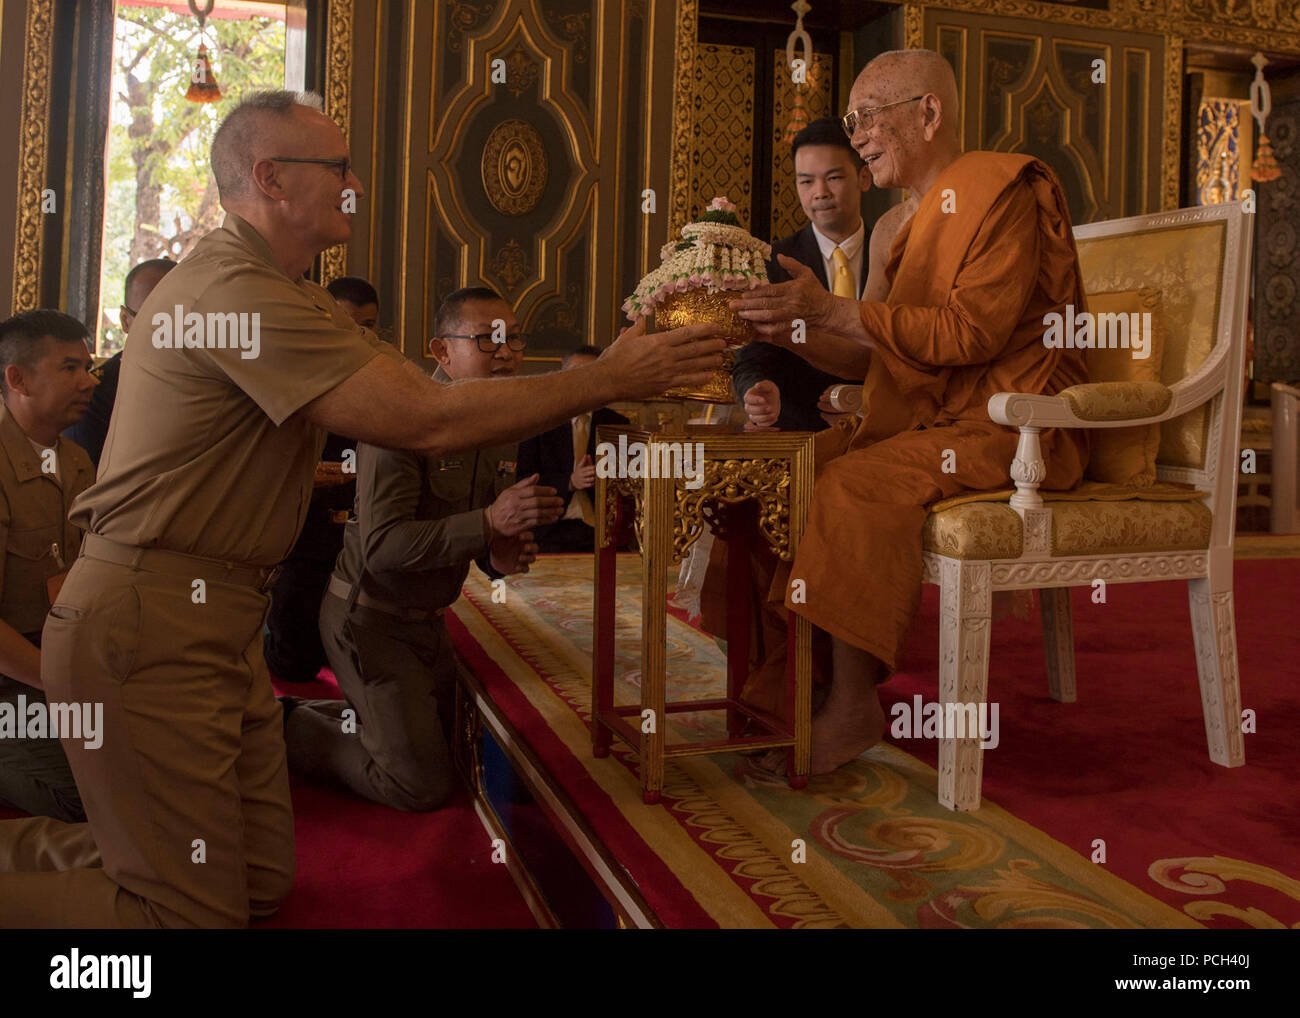 BANGKOK, Thailand (Feb. 12, 2018) Capt. James Johnson, a U.S. Navy  chaplain, presents a gift to the Supreme Patriarch of Thailand during Exercise Cobra Gold. Exercise Cobra Gold 2018 is an annual exercise conducted in the Kingdom of Thailand held from Feb. 13-23 with seven full participating nations. Stock Photo